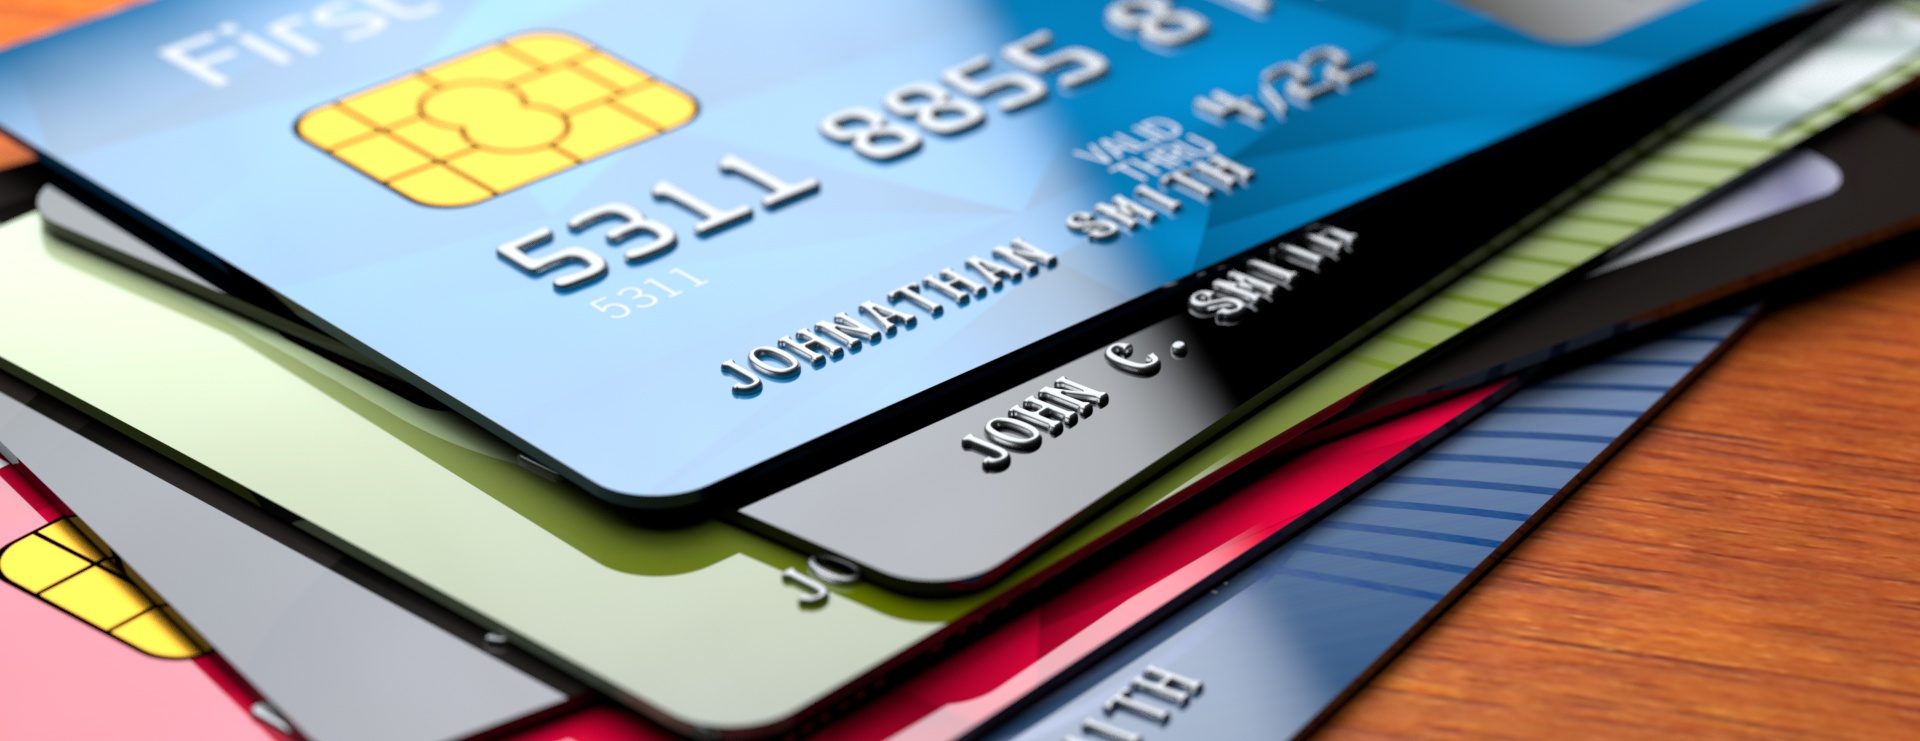 too-many-credit-cards-cropped-jpg